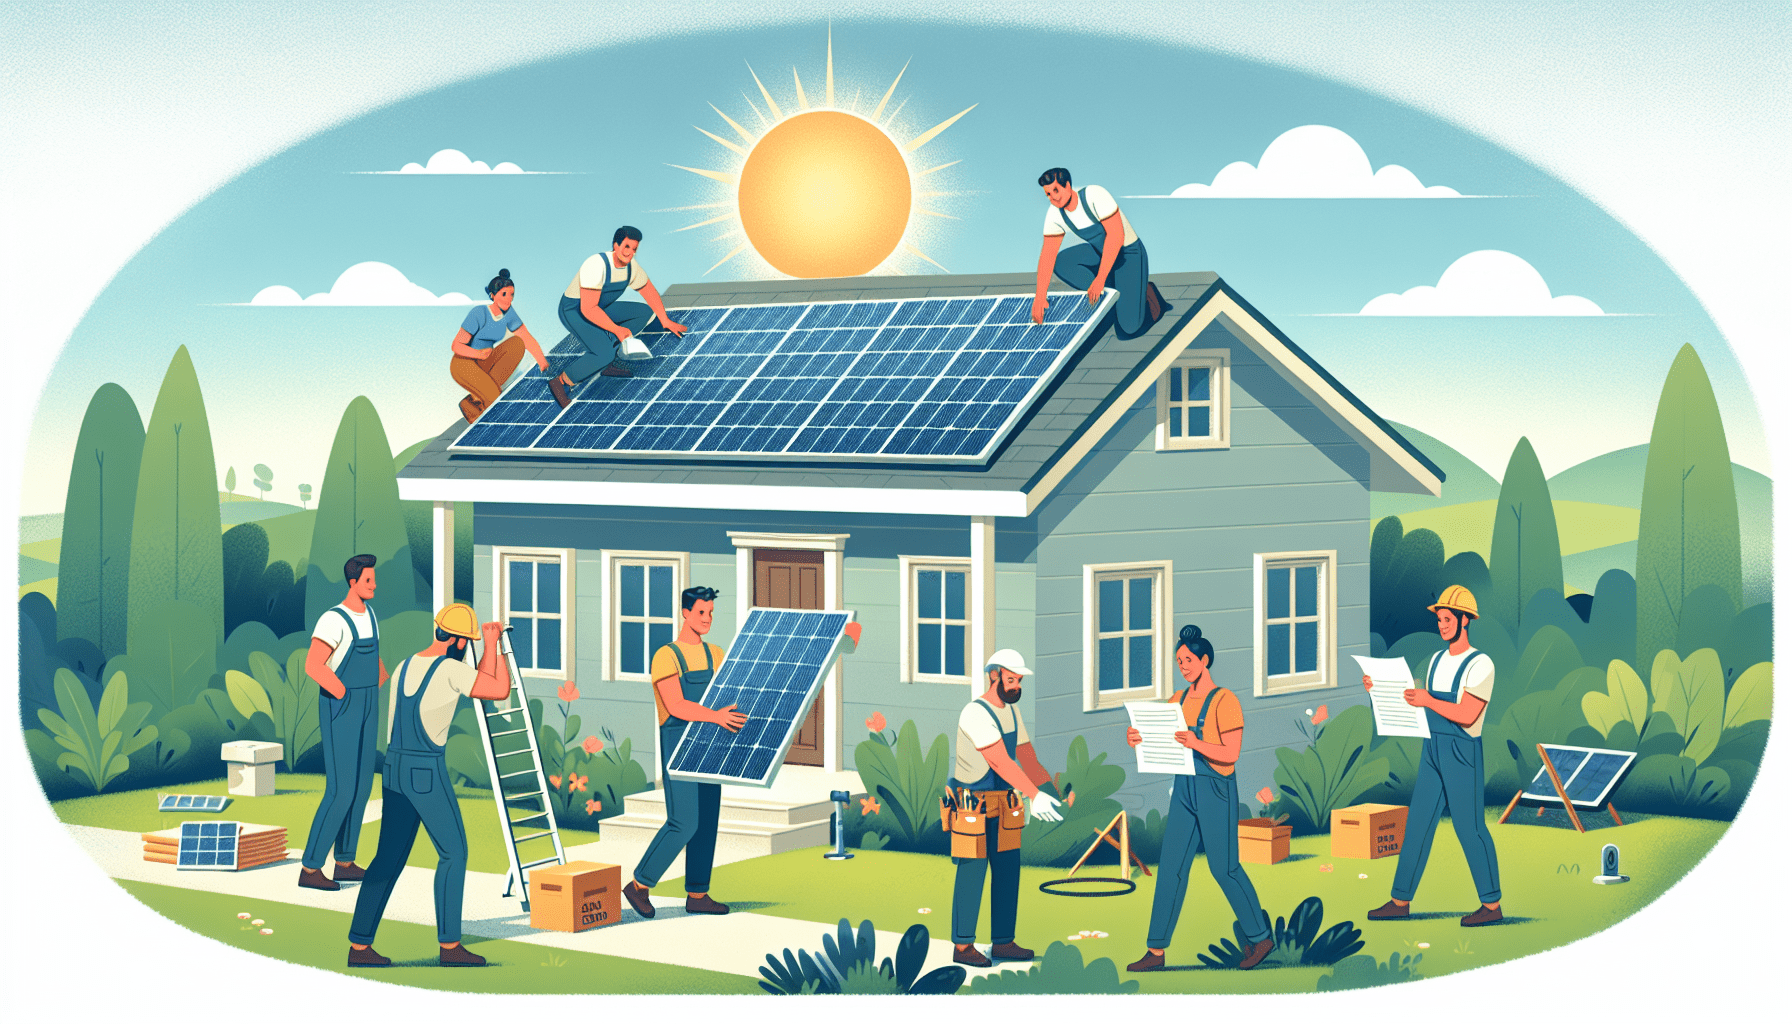 How To Ensure Your Solar Installation Meets Local Regulations?